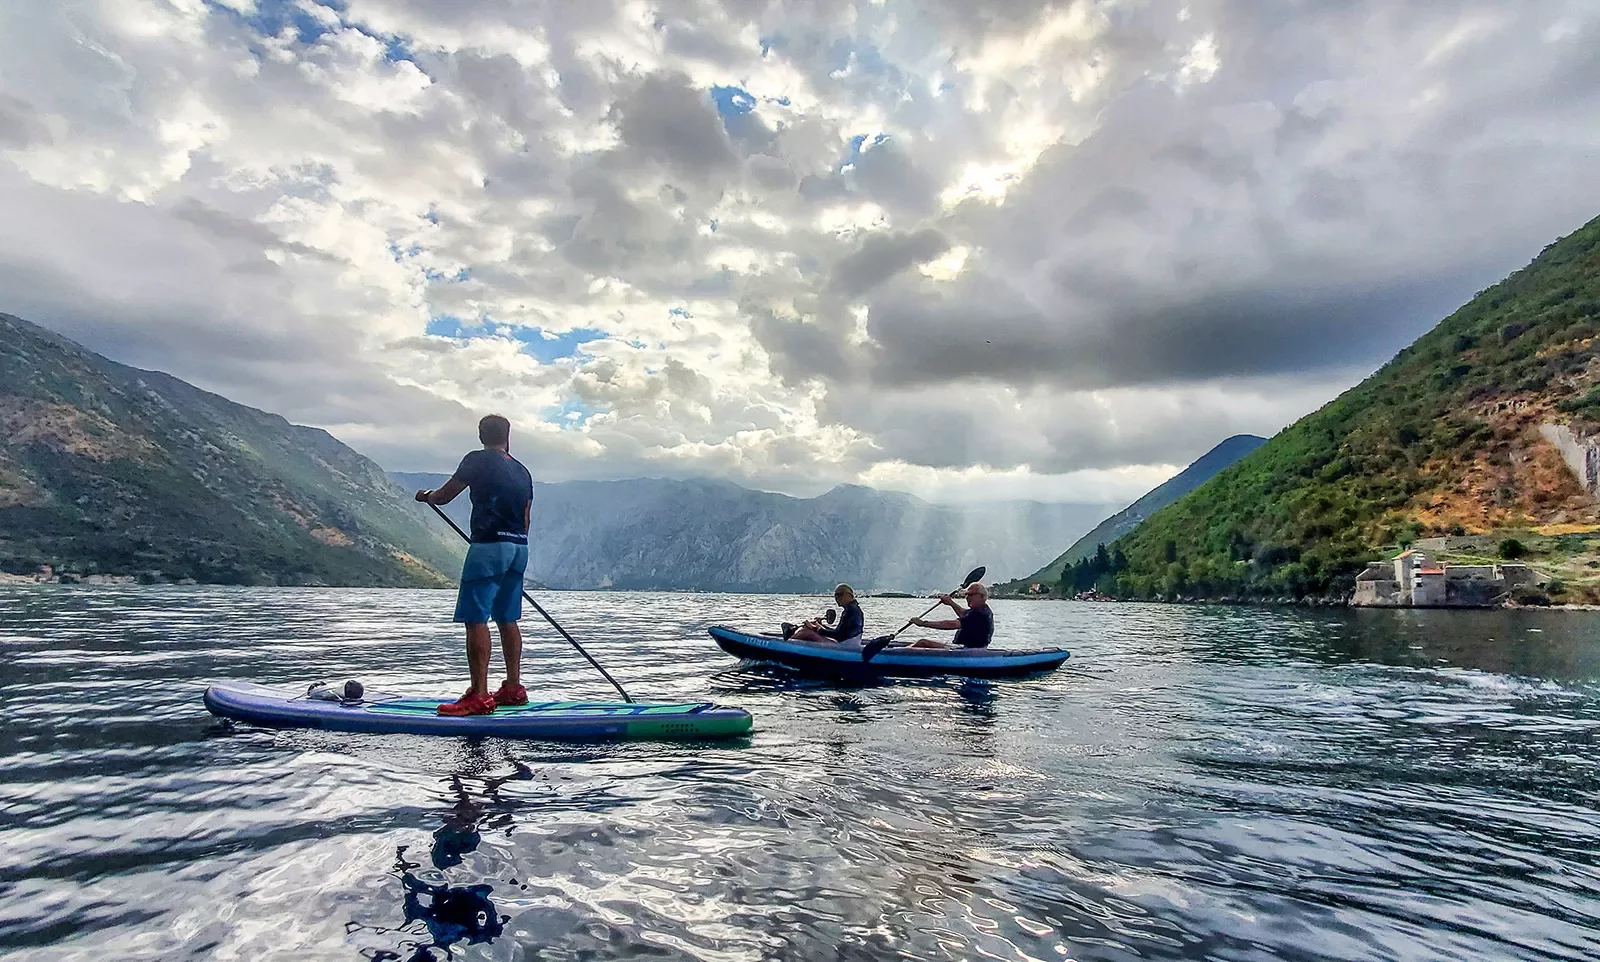 Two guests kayaking, one paddle boarding, clouds, hills in distance.